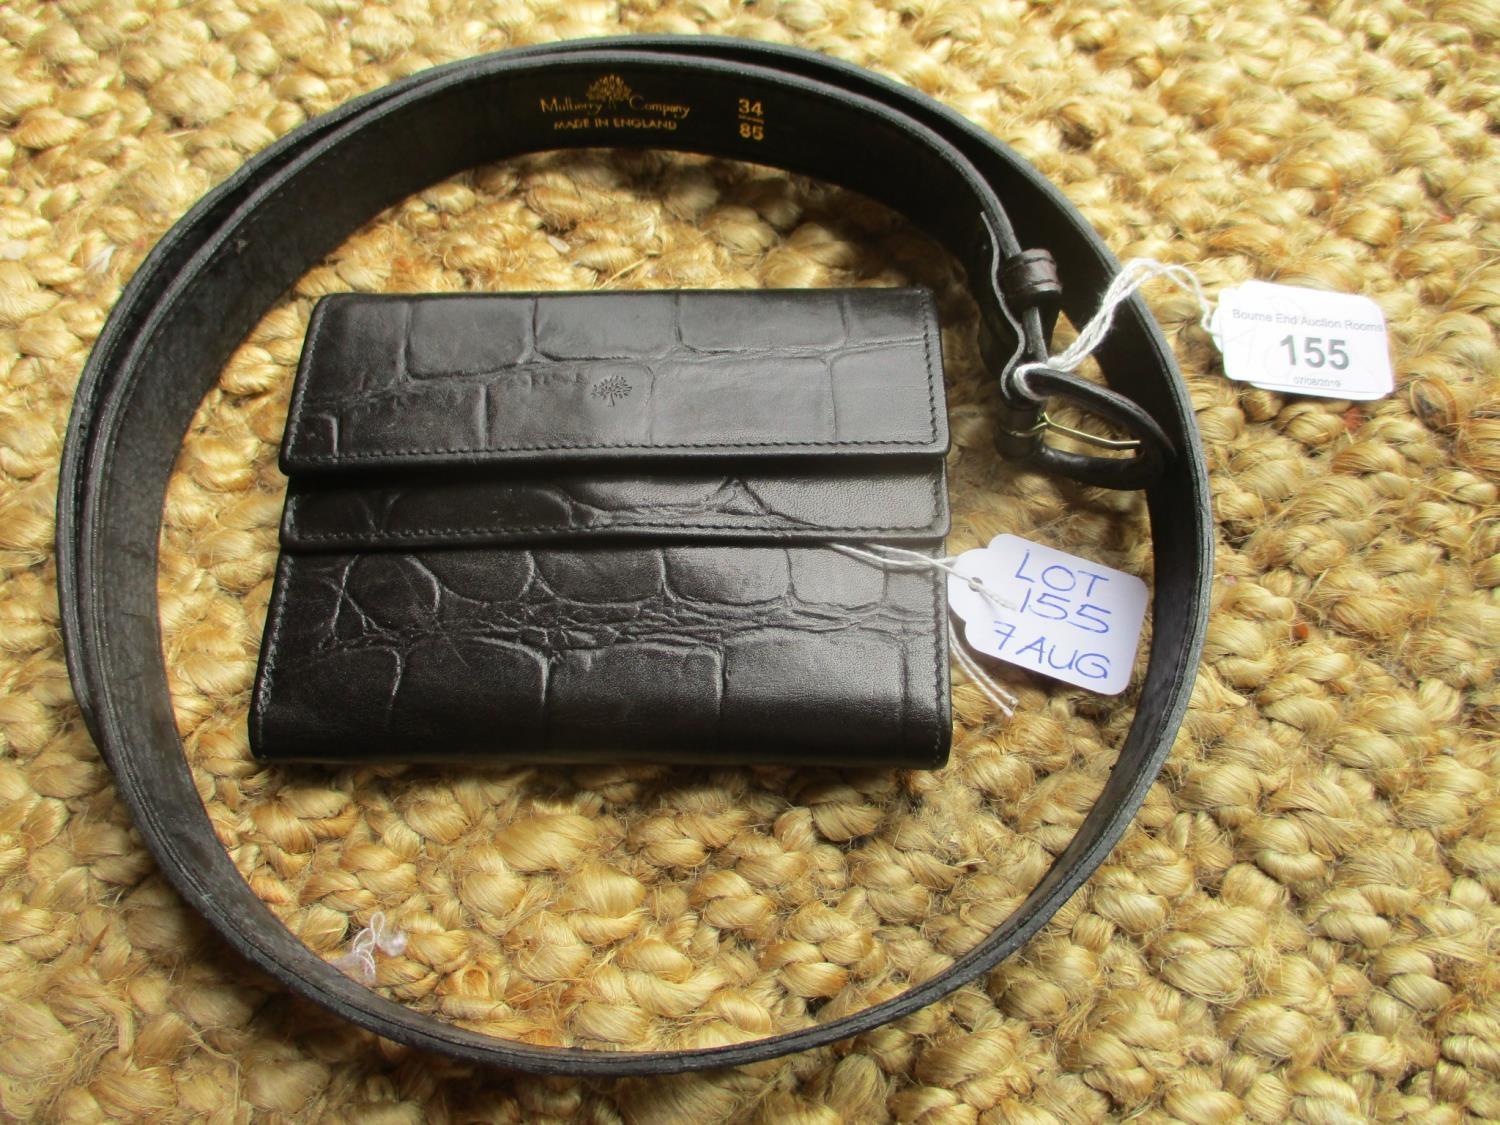 A Mulberry black leather wallet and a matching Mulberry belt, both in a crocodile textured